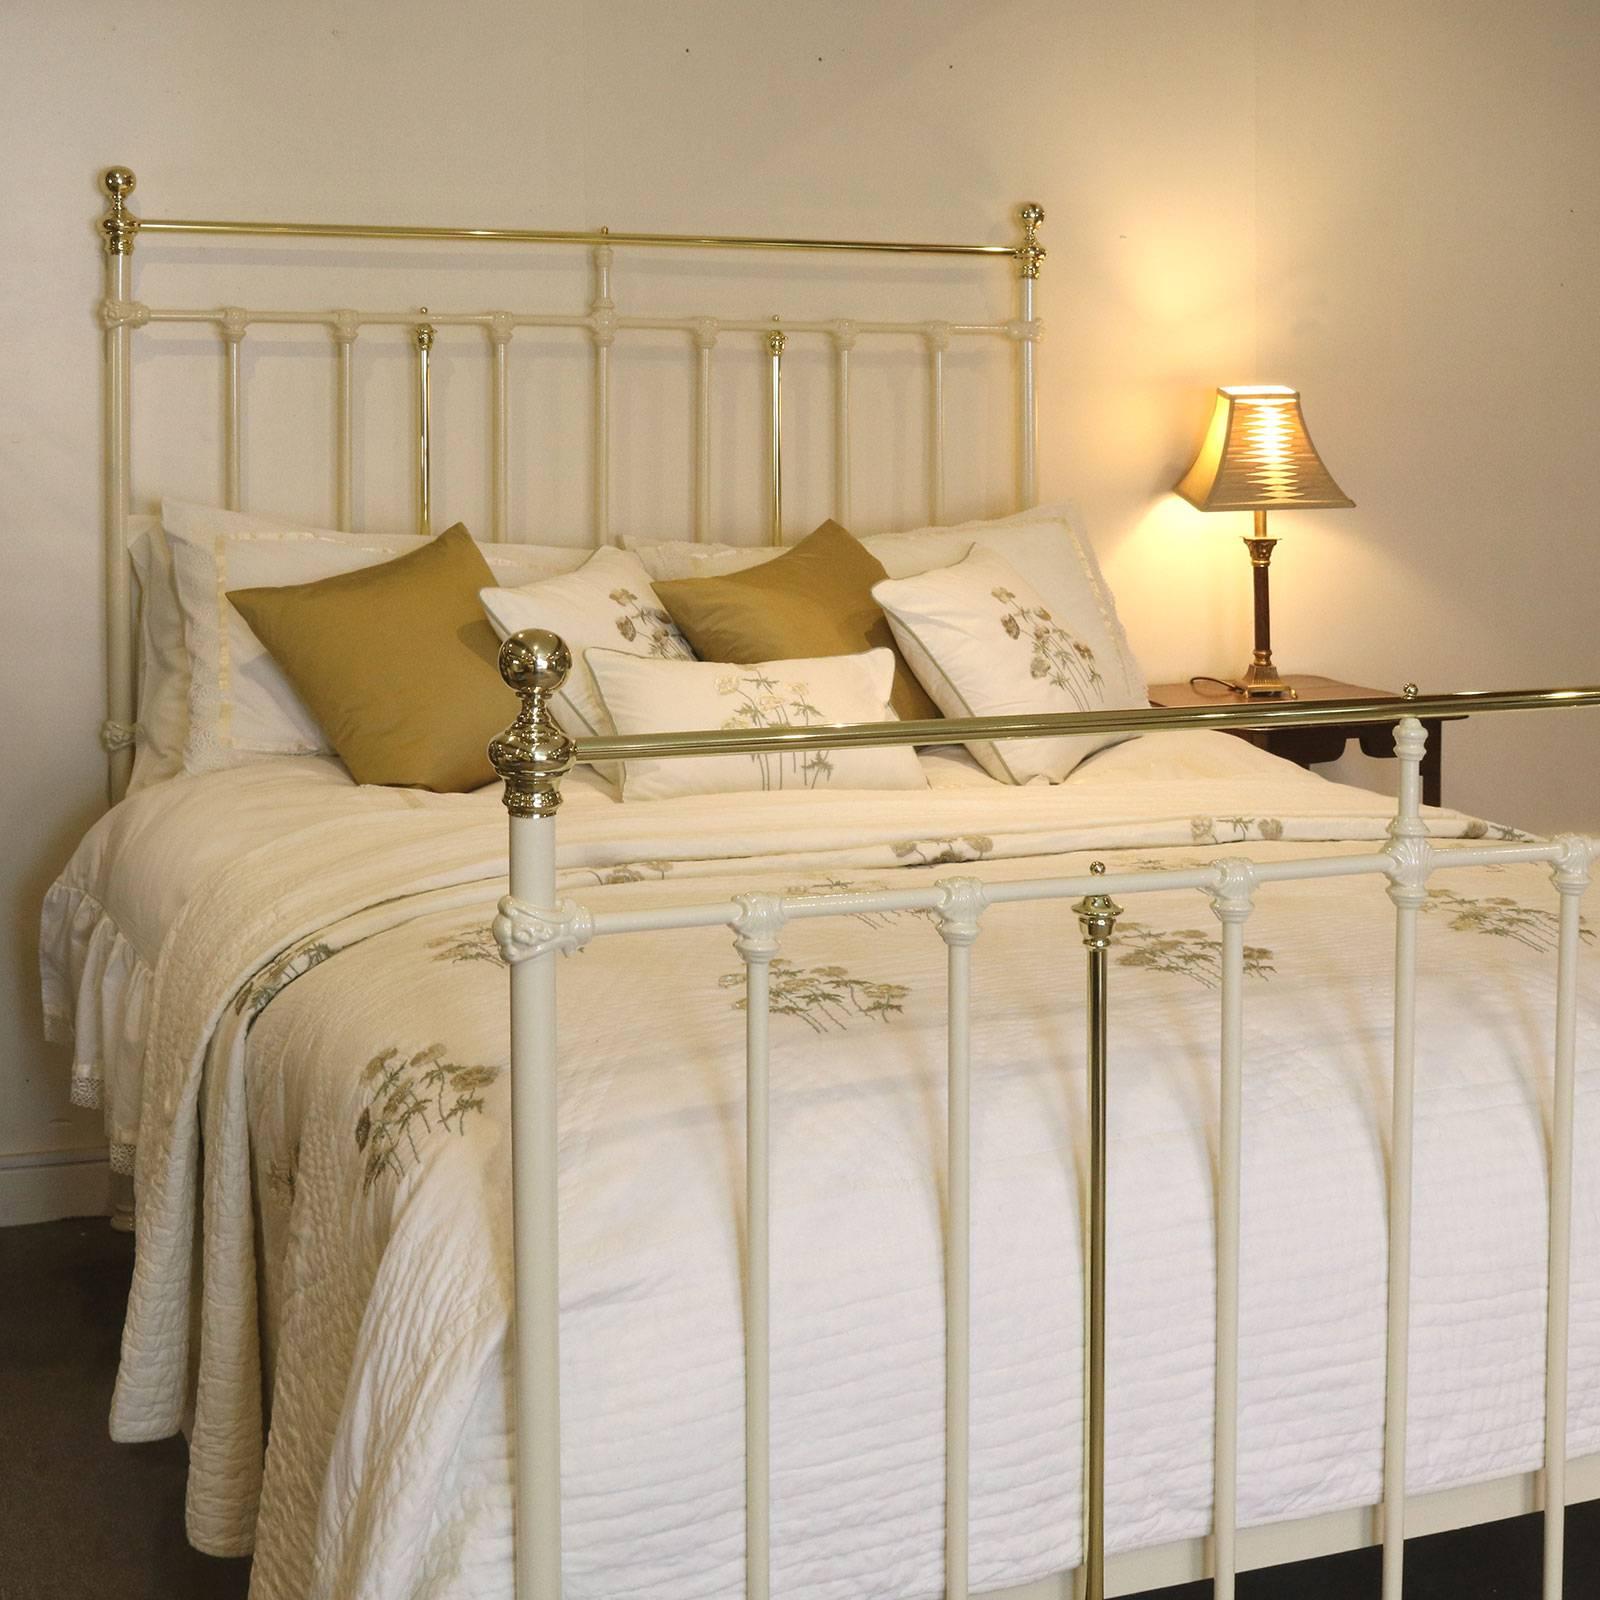 An attractive brass and iron Victorian bed with decorative castings.

This bed accepts a British king-size or American queen-size (60 inches, 5 ft or 150 cm wide) base and mattress set.

The price is for the bed frame alone. The base, mattress,